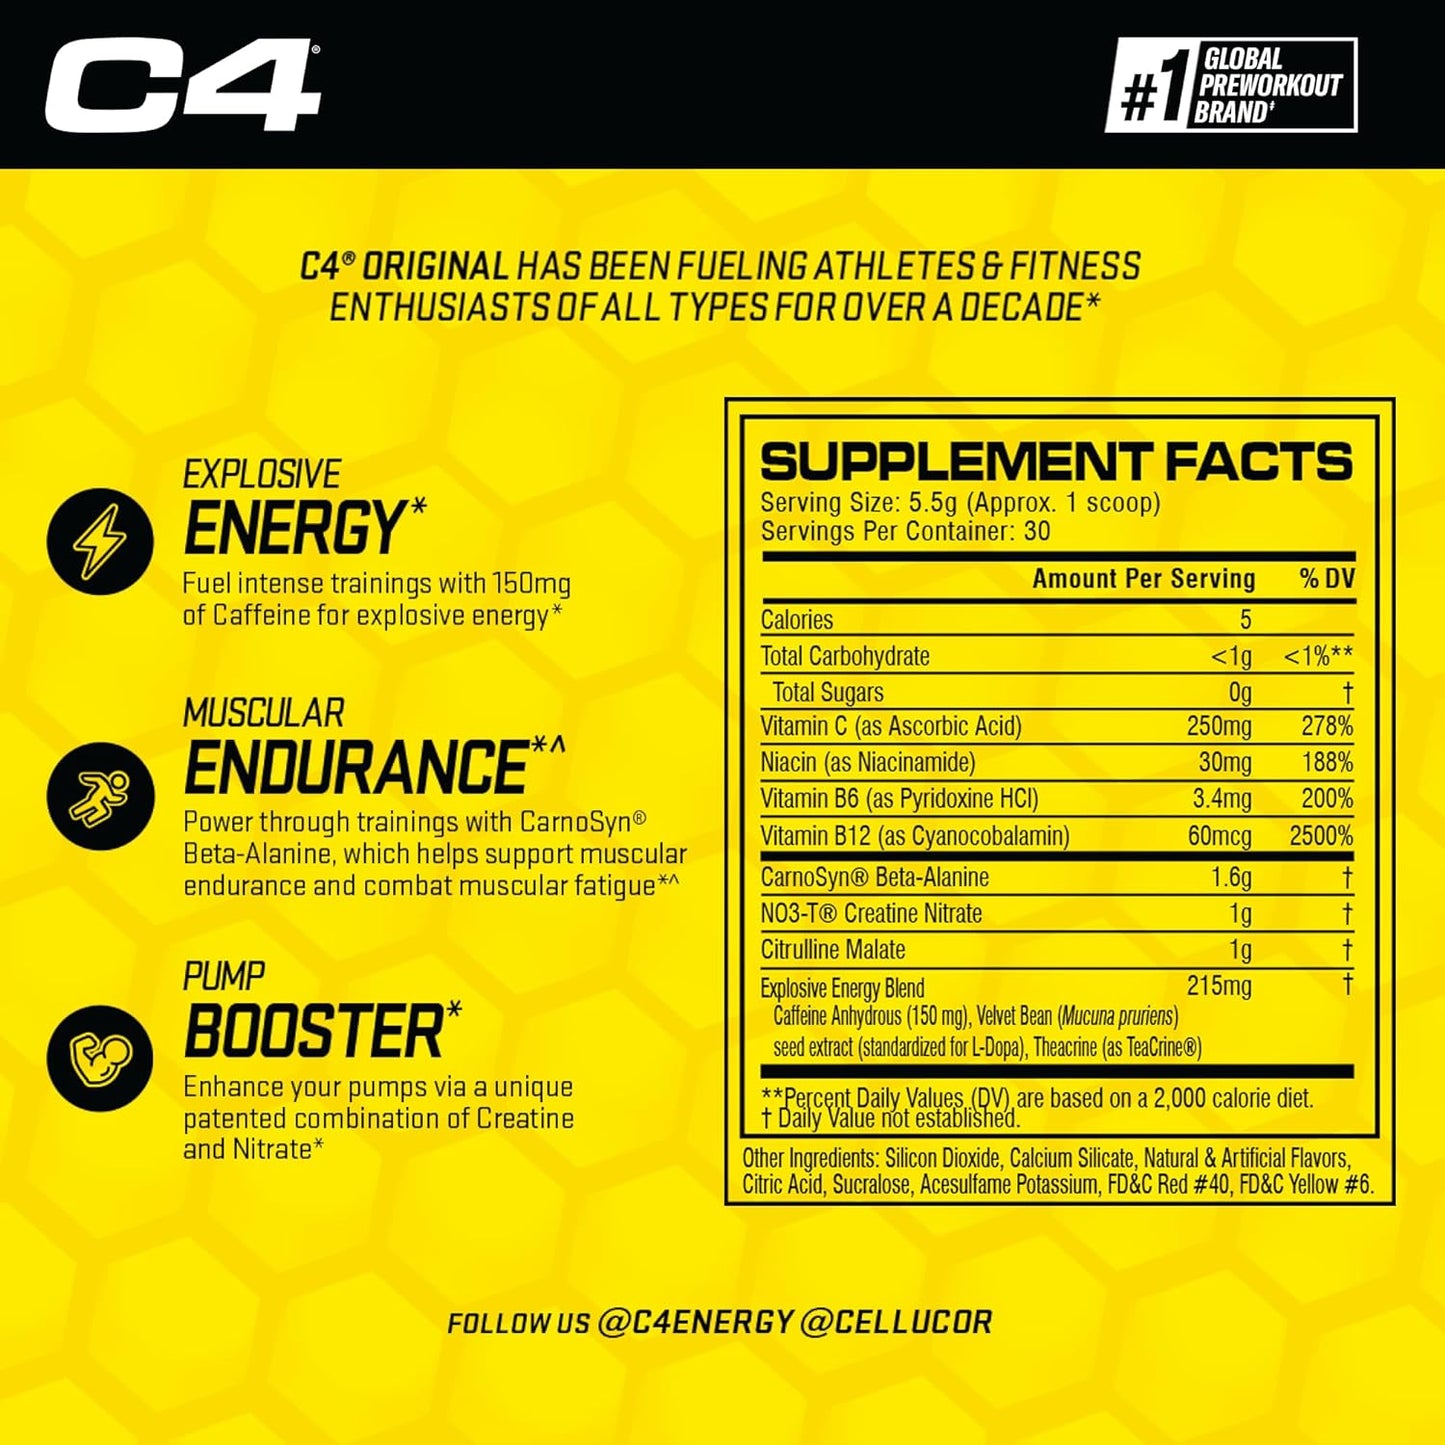 C4 Original Pre Workout Powder Strawberry Watermelon Ice Sugar Free Preworkout Energy for Men & Women 150Mg Caffeine + Beta Alanine + Creatine - 30 Servings (Packaging May Vary)